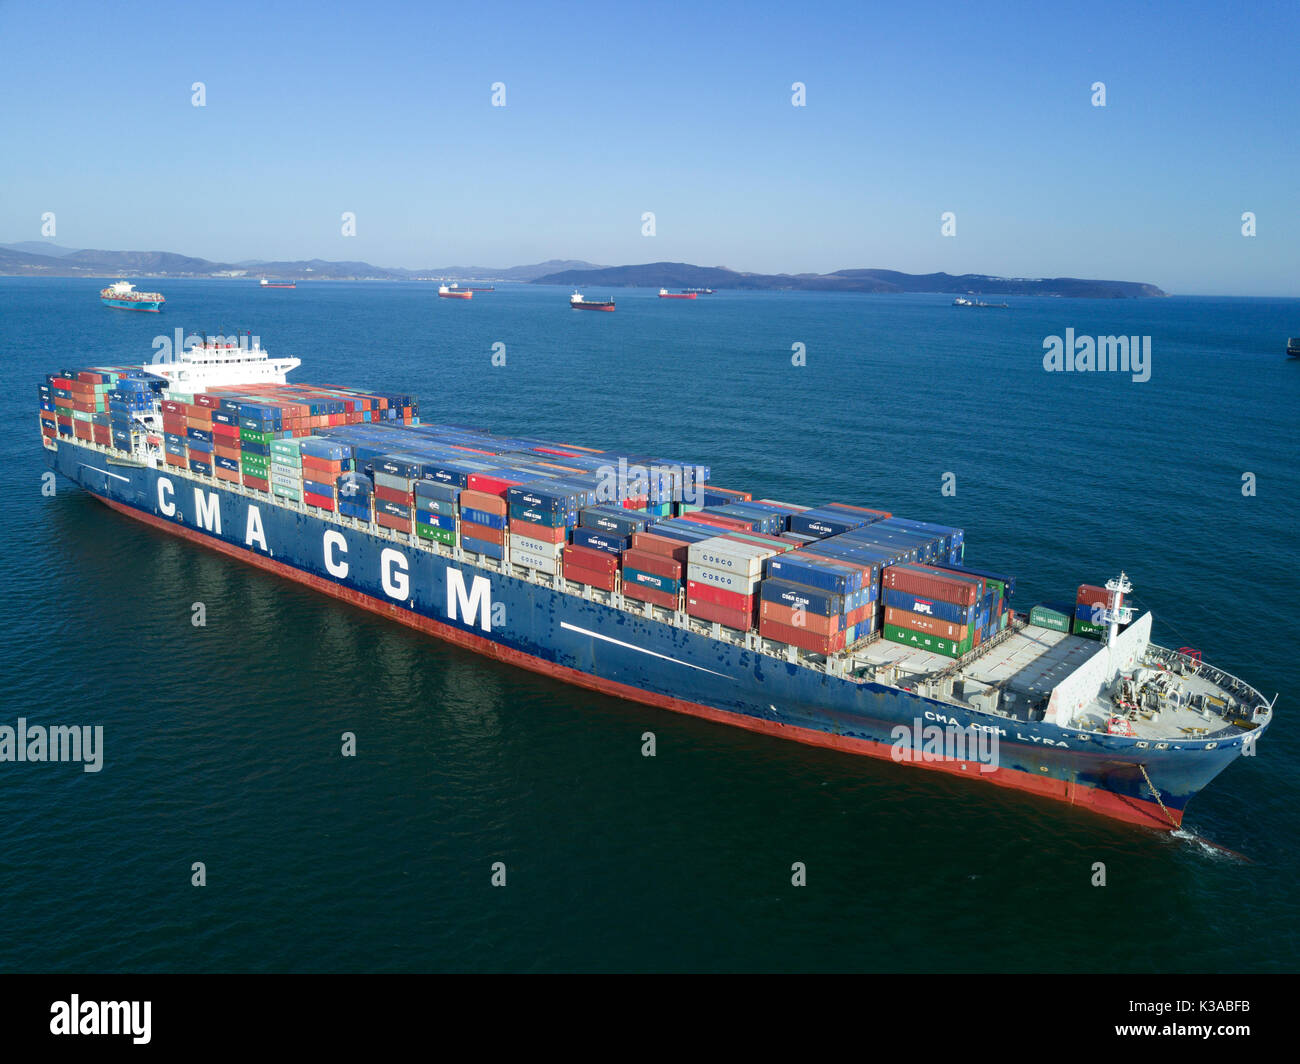 Nakhodka, Russia- April 25, 2017: Container ship CMA CGM Lyra standing on the roads at anchor. Stock Photo